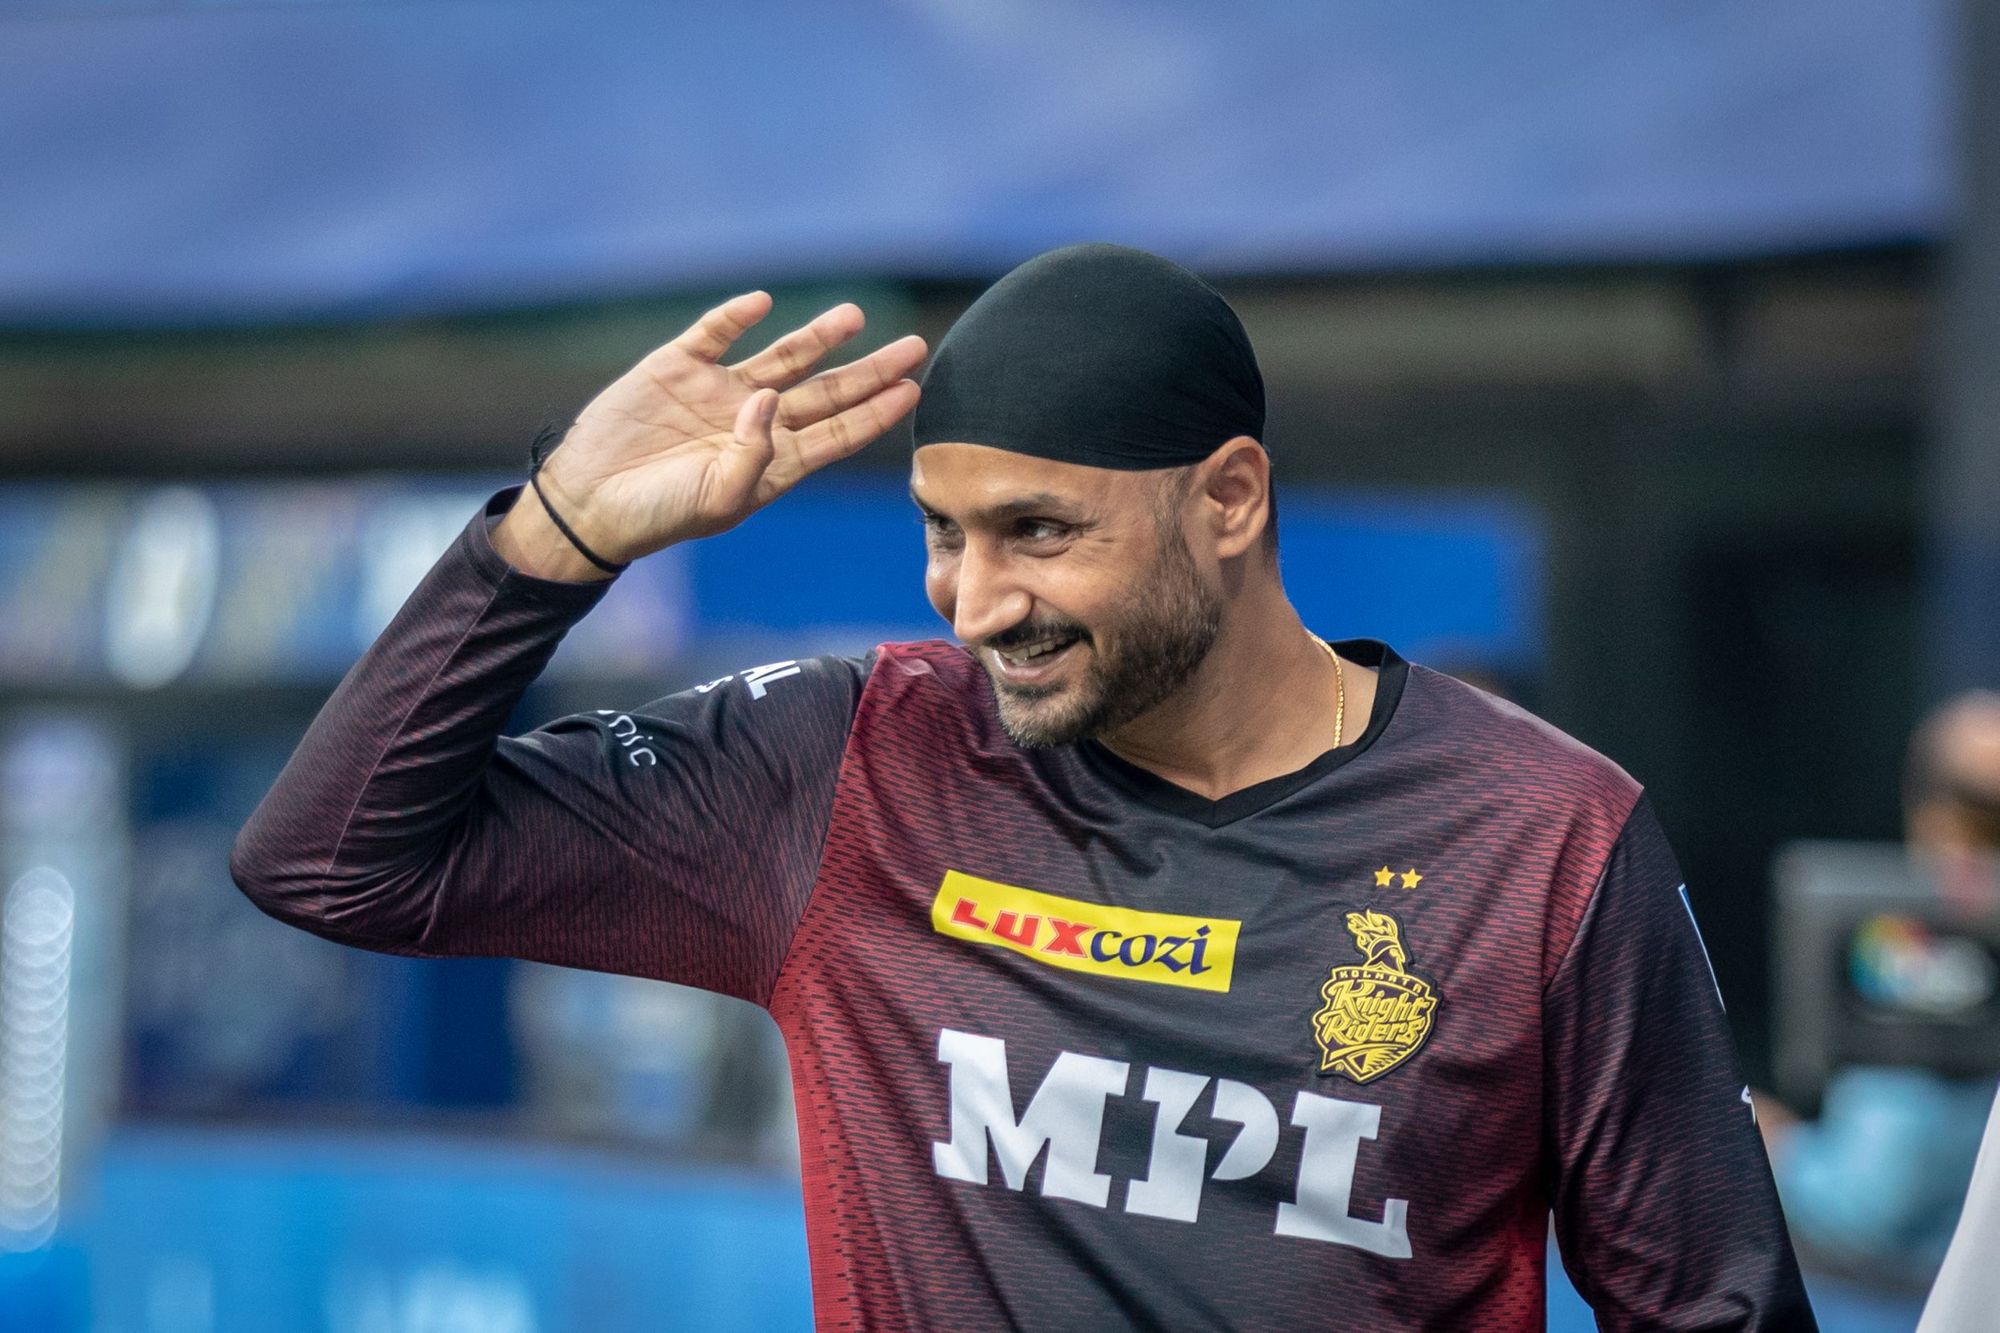 Harbhajan Singh is currently playing for KKR in IPL | BCCi/IPL